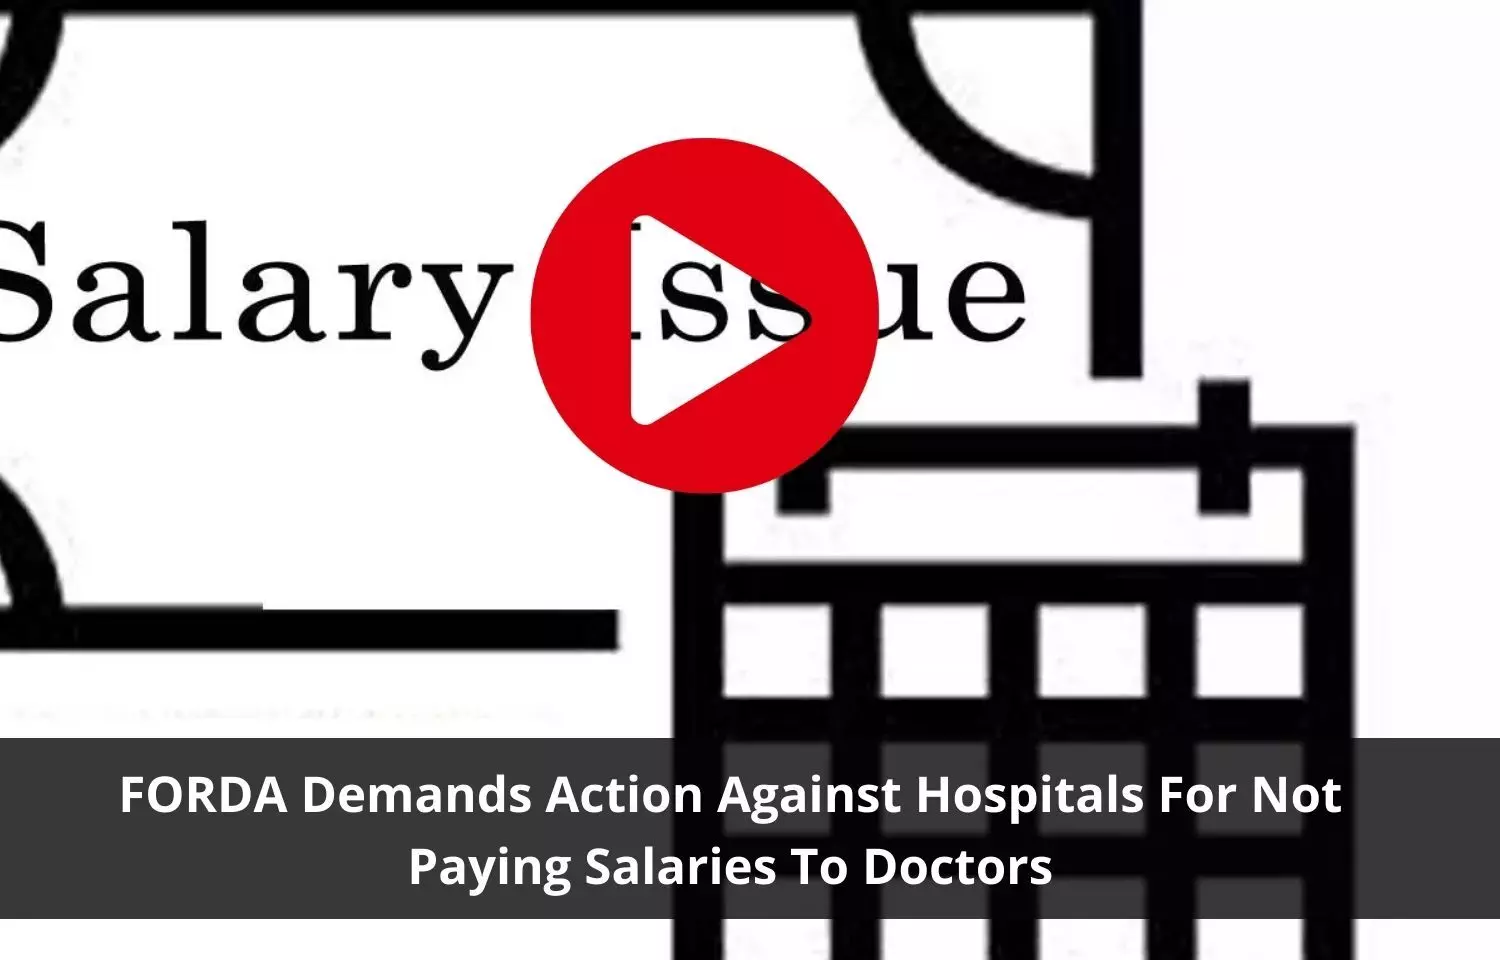 FORDA demands action against hospitals for not paying salaries to doctors